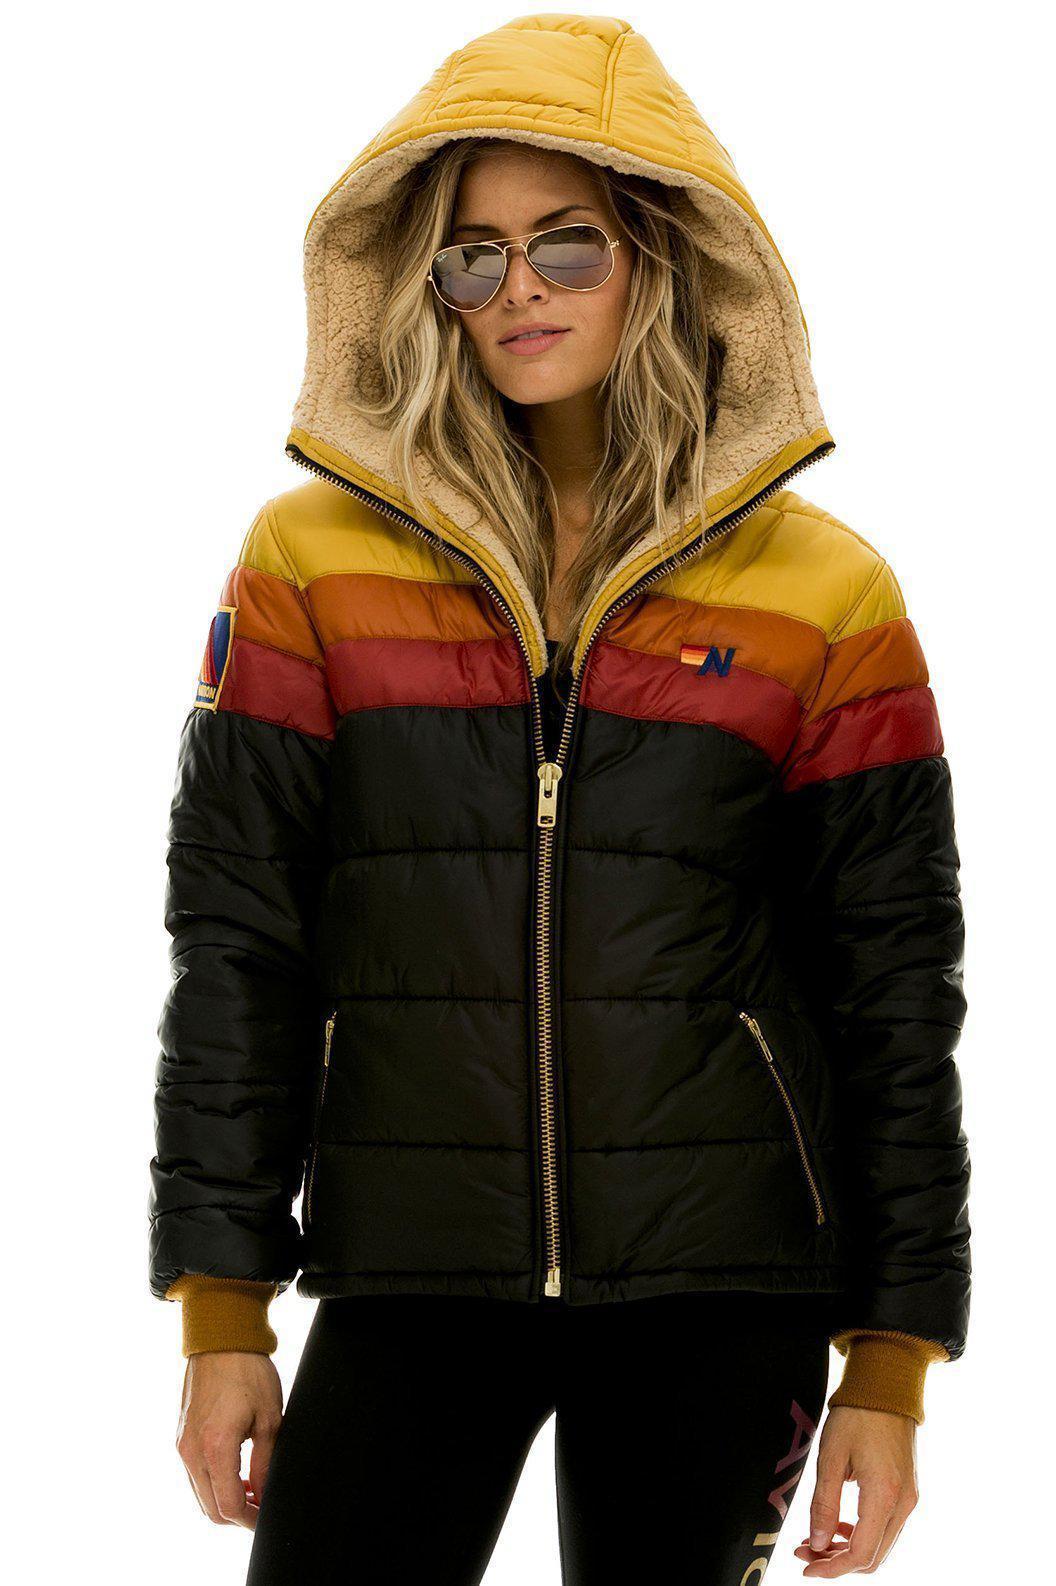 Top Six Best Puffer Jackets For Your Winter Wardrobe [2023]